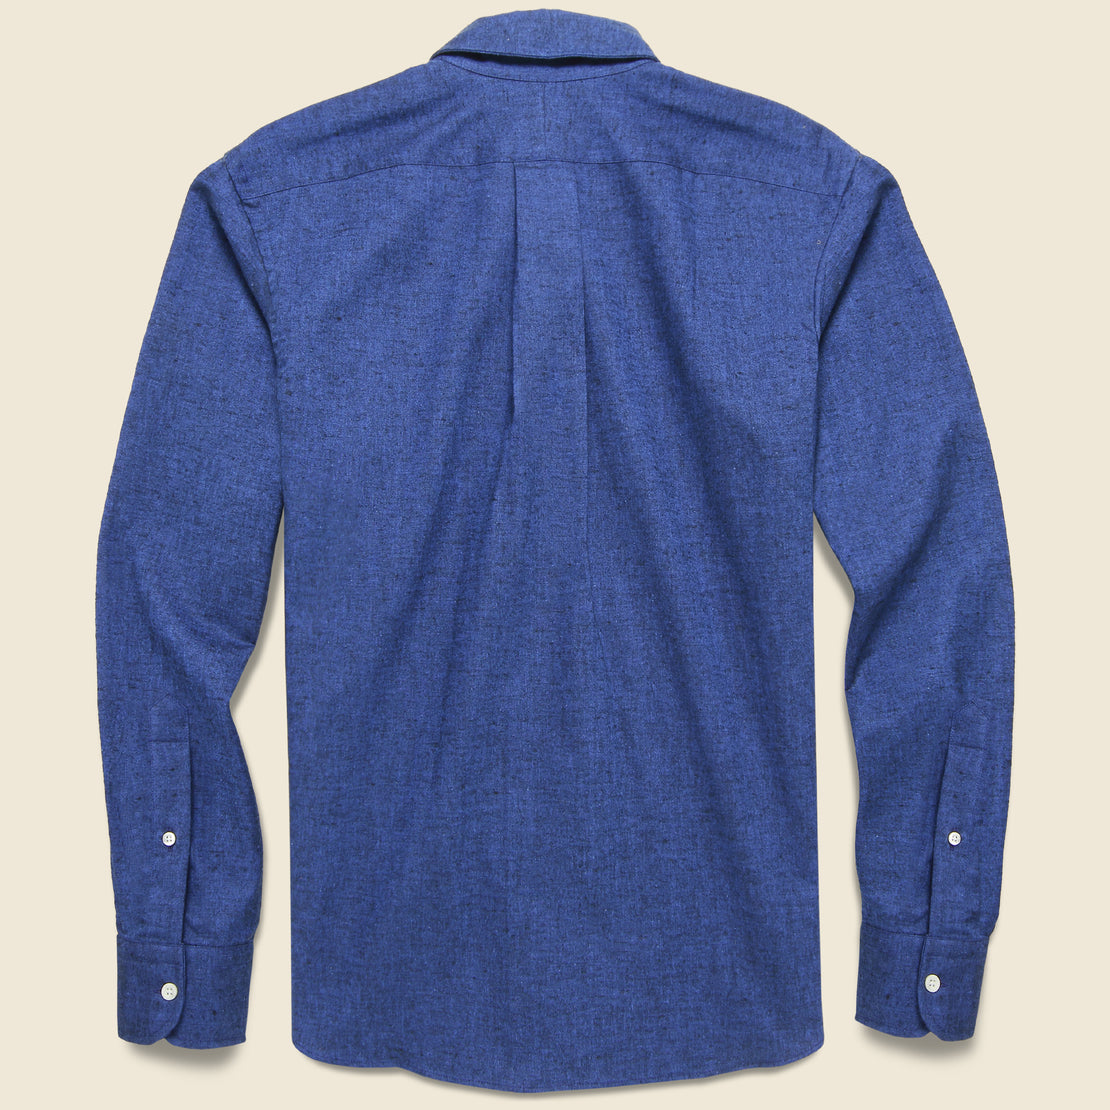 Brushed Twill Shirt - Dark Cobalt/Black - Hamilton Shirt Co. - STAG Provisions - Tops - L/S Woven - Other Pattern